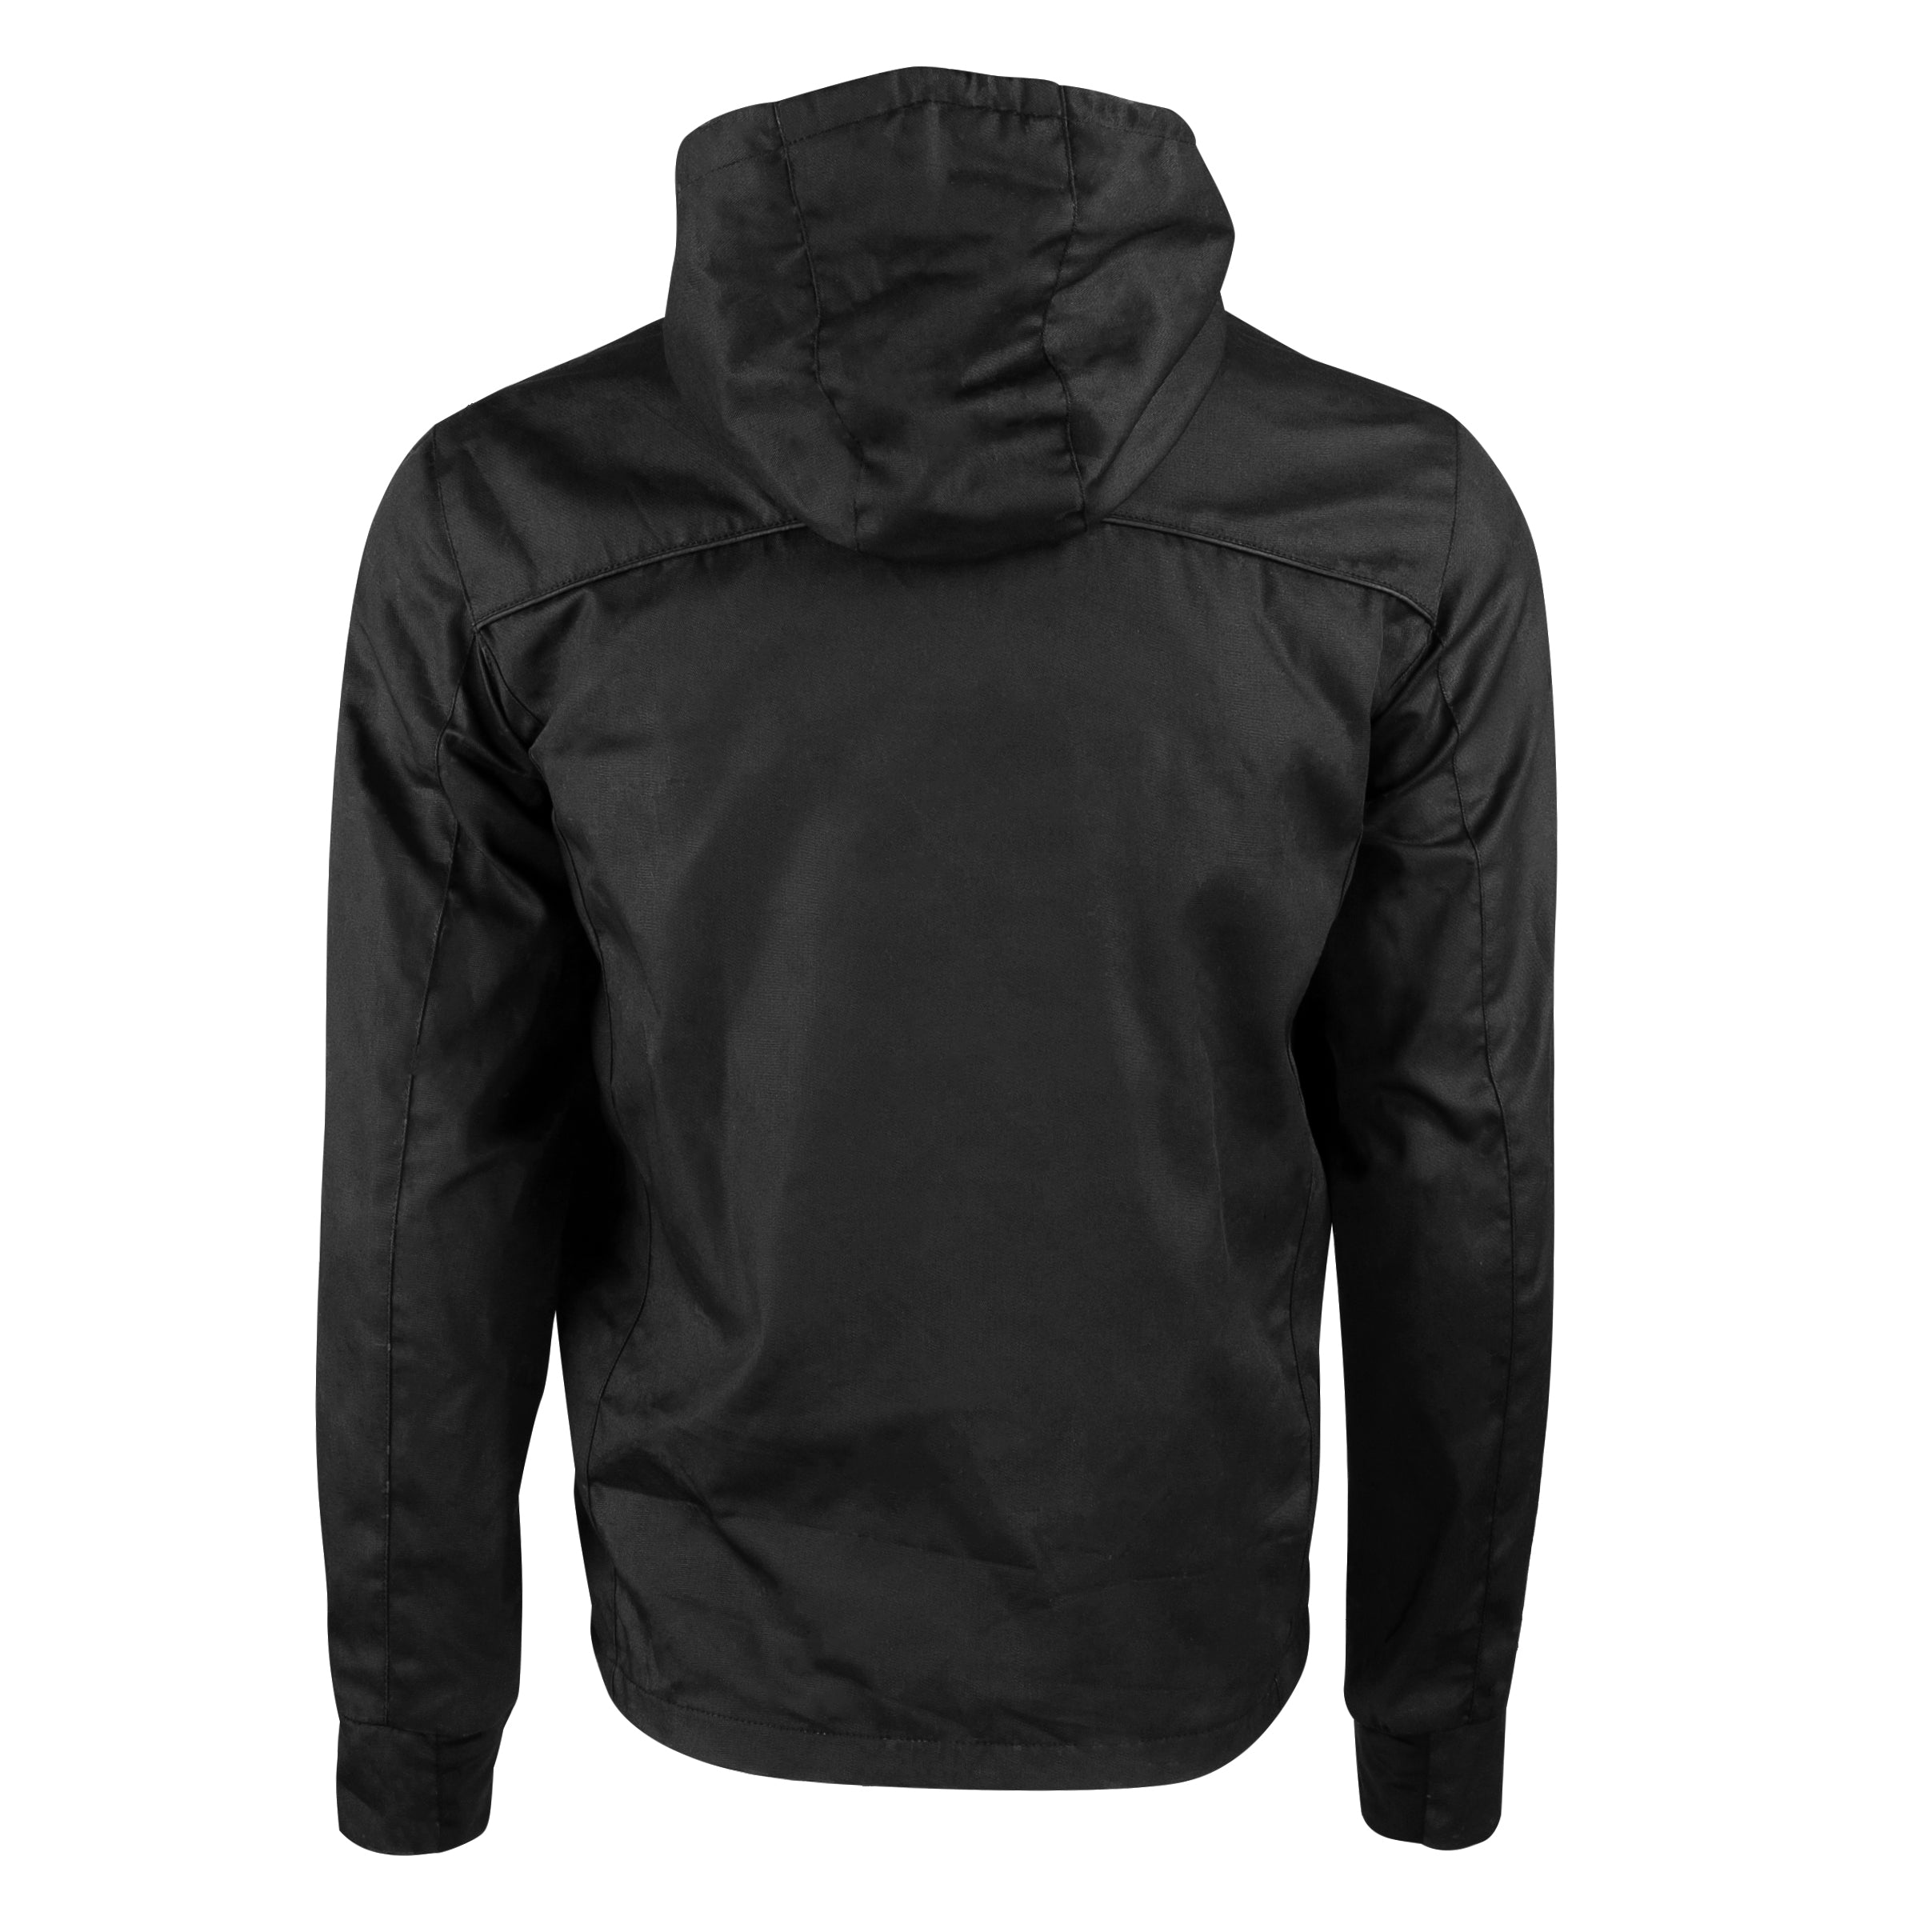 GoGo Gear Protective Armored Hoodie